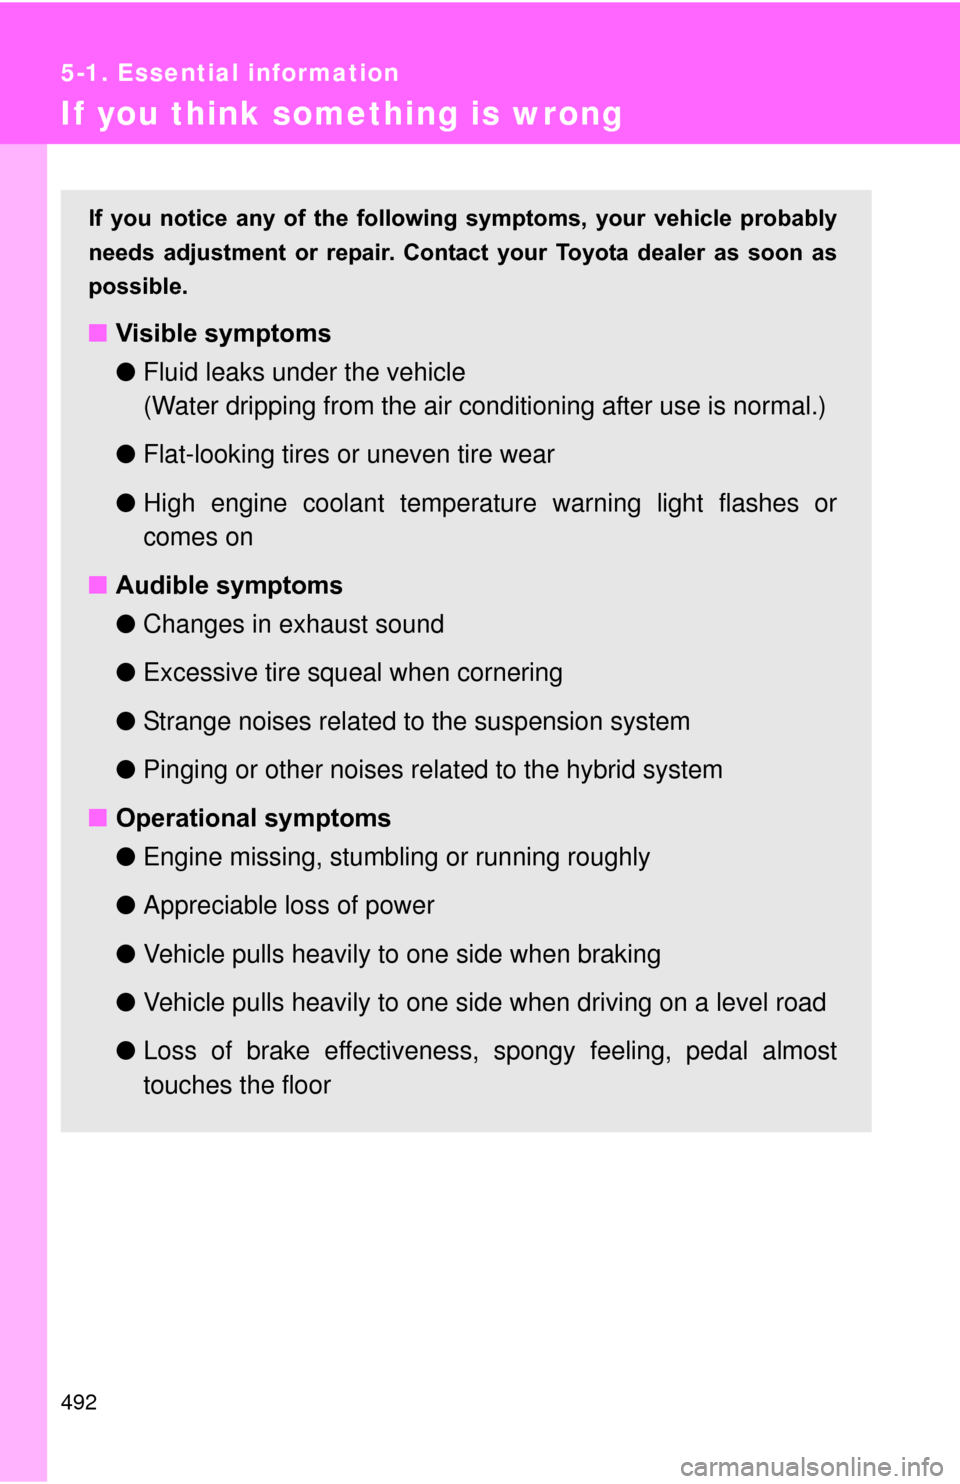 TOYOTA PRIUS 2012 3.G Owners Manual 492
5-1. Essential information
If you think something is wrong
If  you  notice  any  of  the  following  symptoms,  your  vehicle  probably
needs  adjustment  or  repair.  Contact  your  Toyota  deale